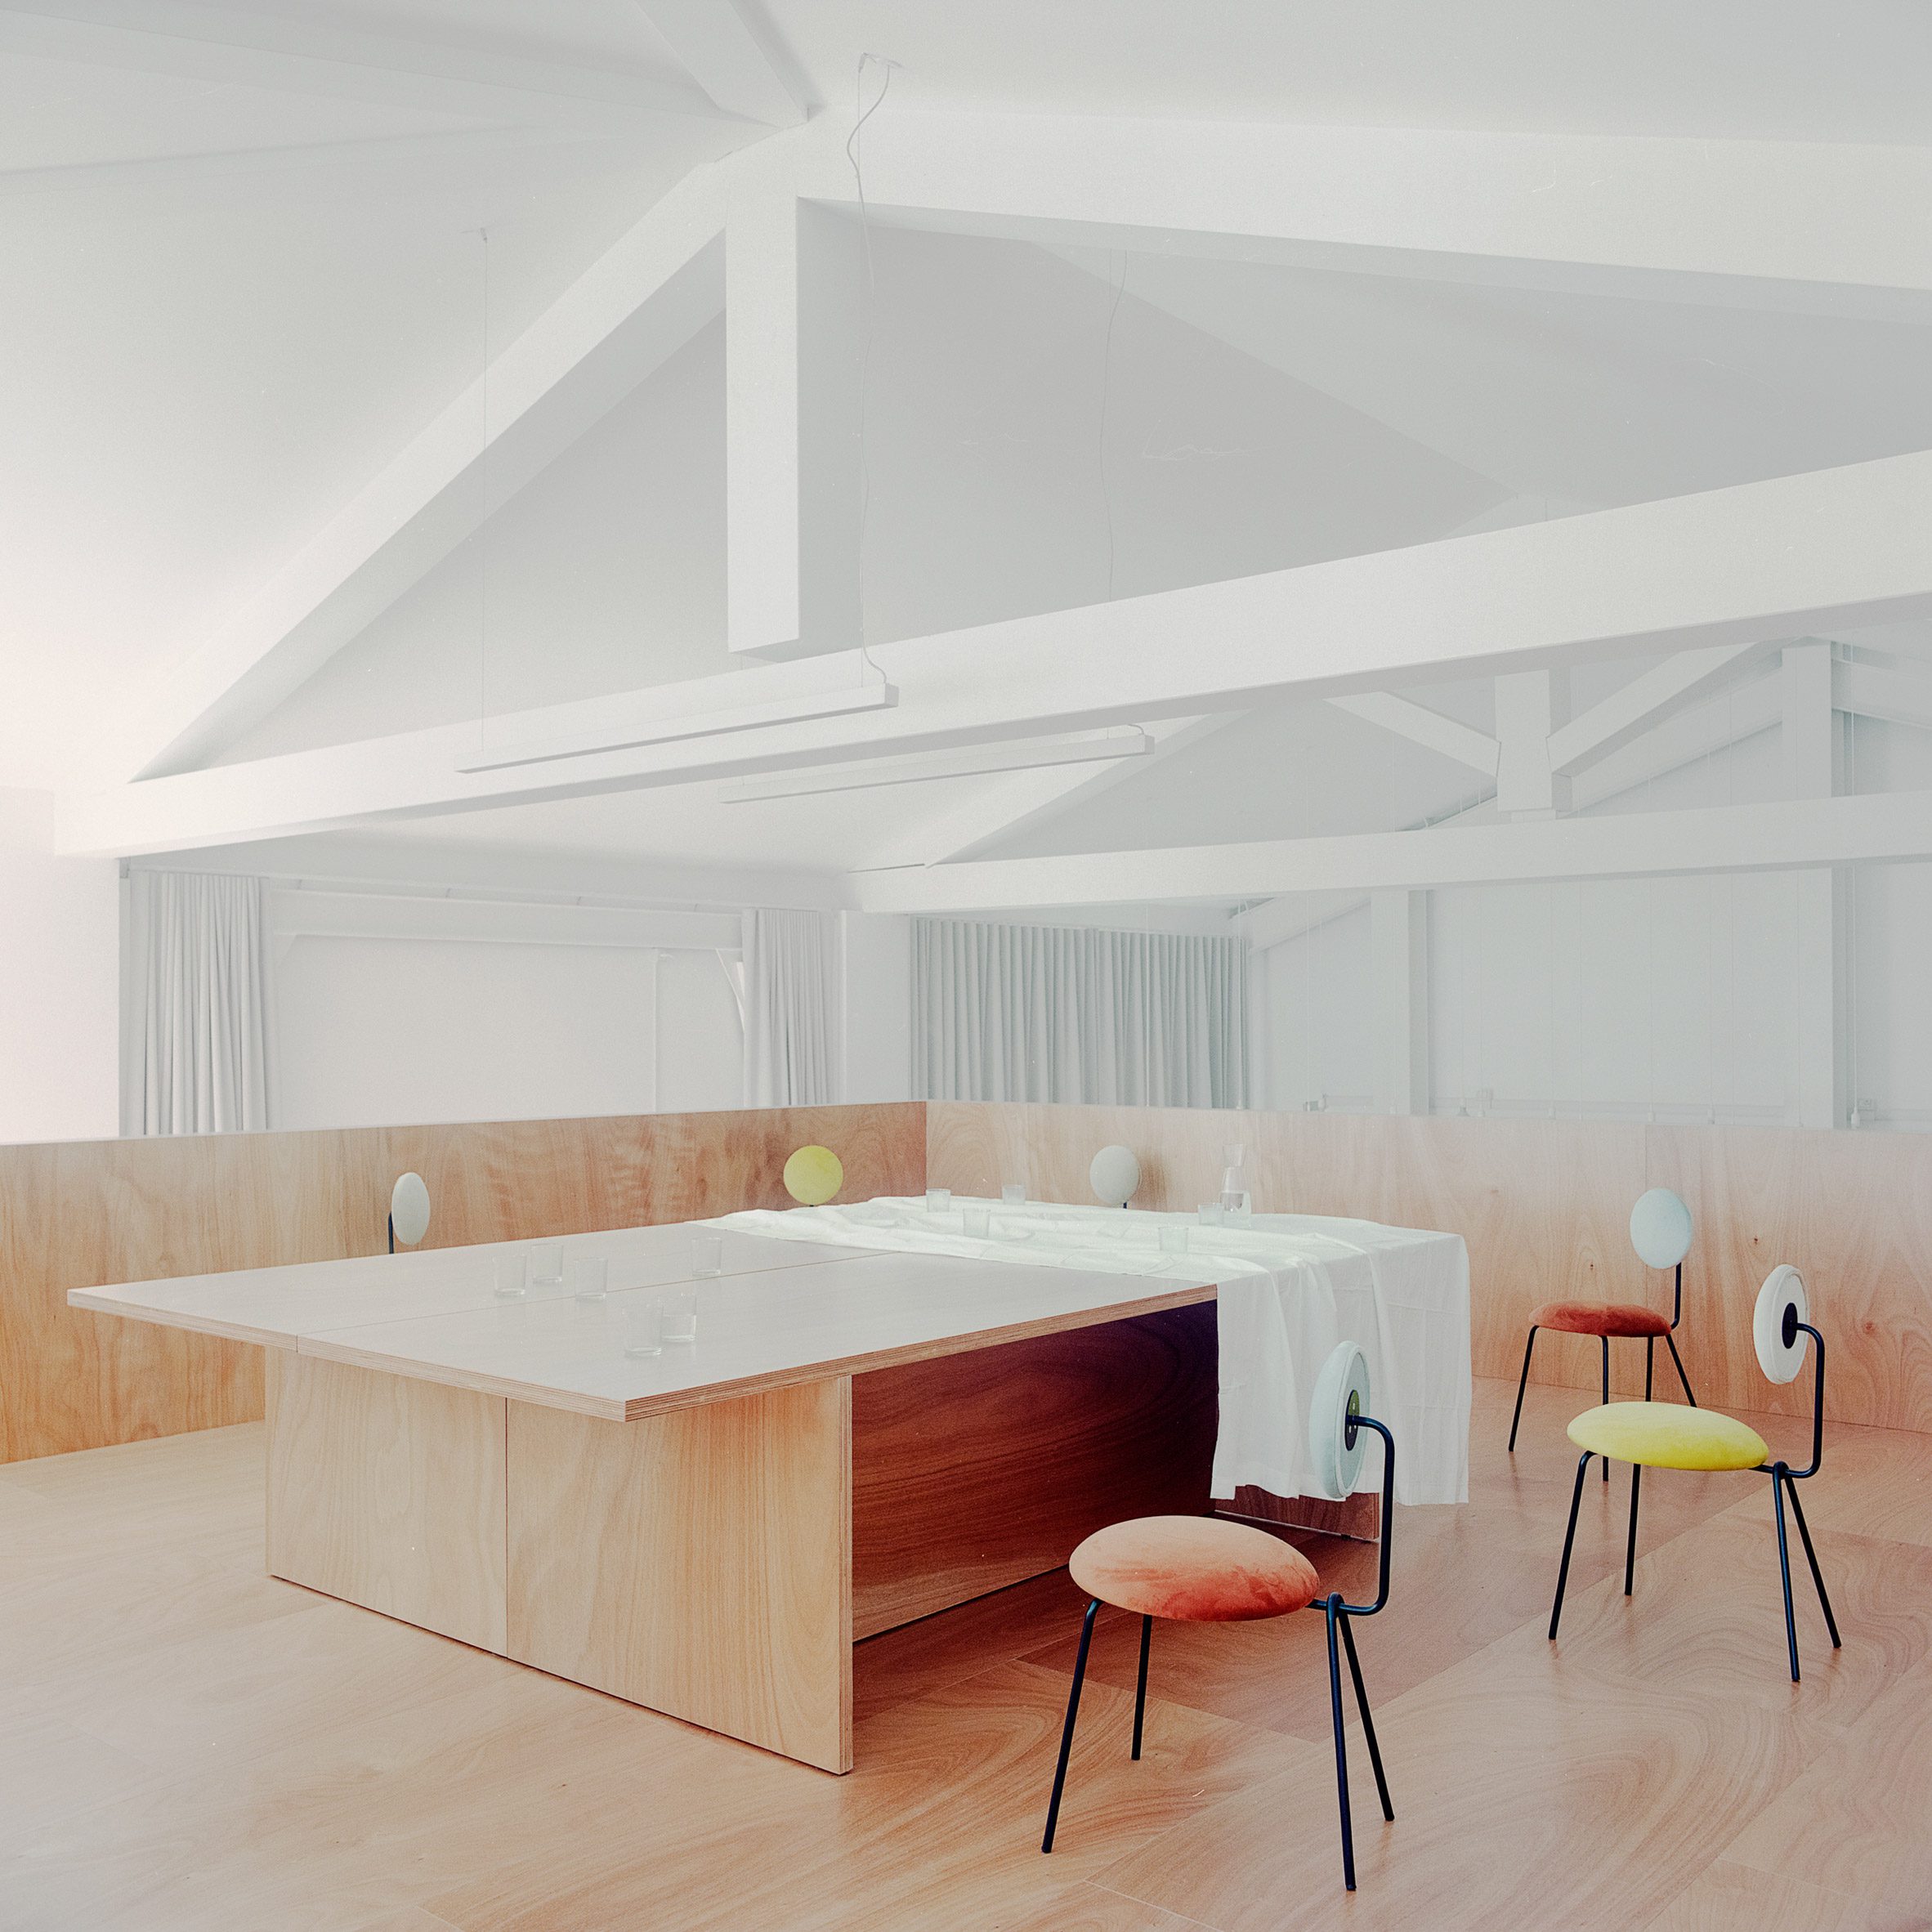 Mezzanine meeting room, Cesarin show kitchen by Co.arch Studio